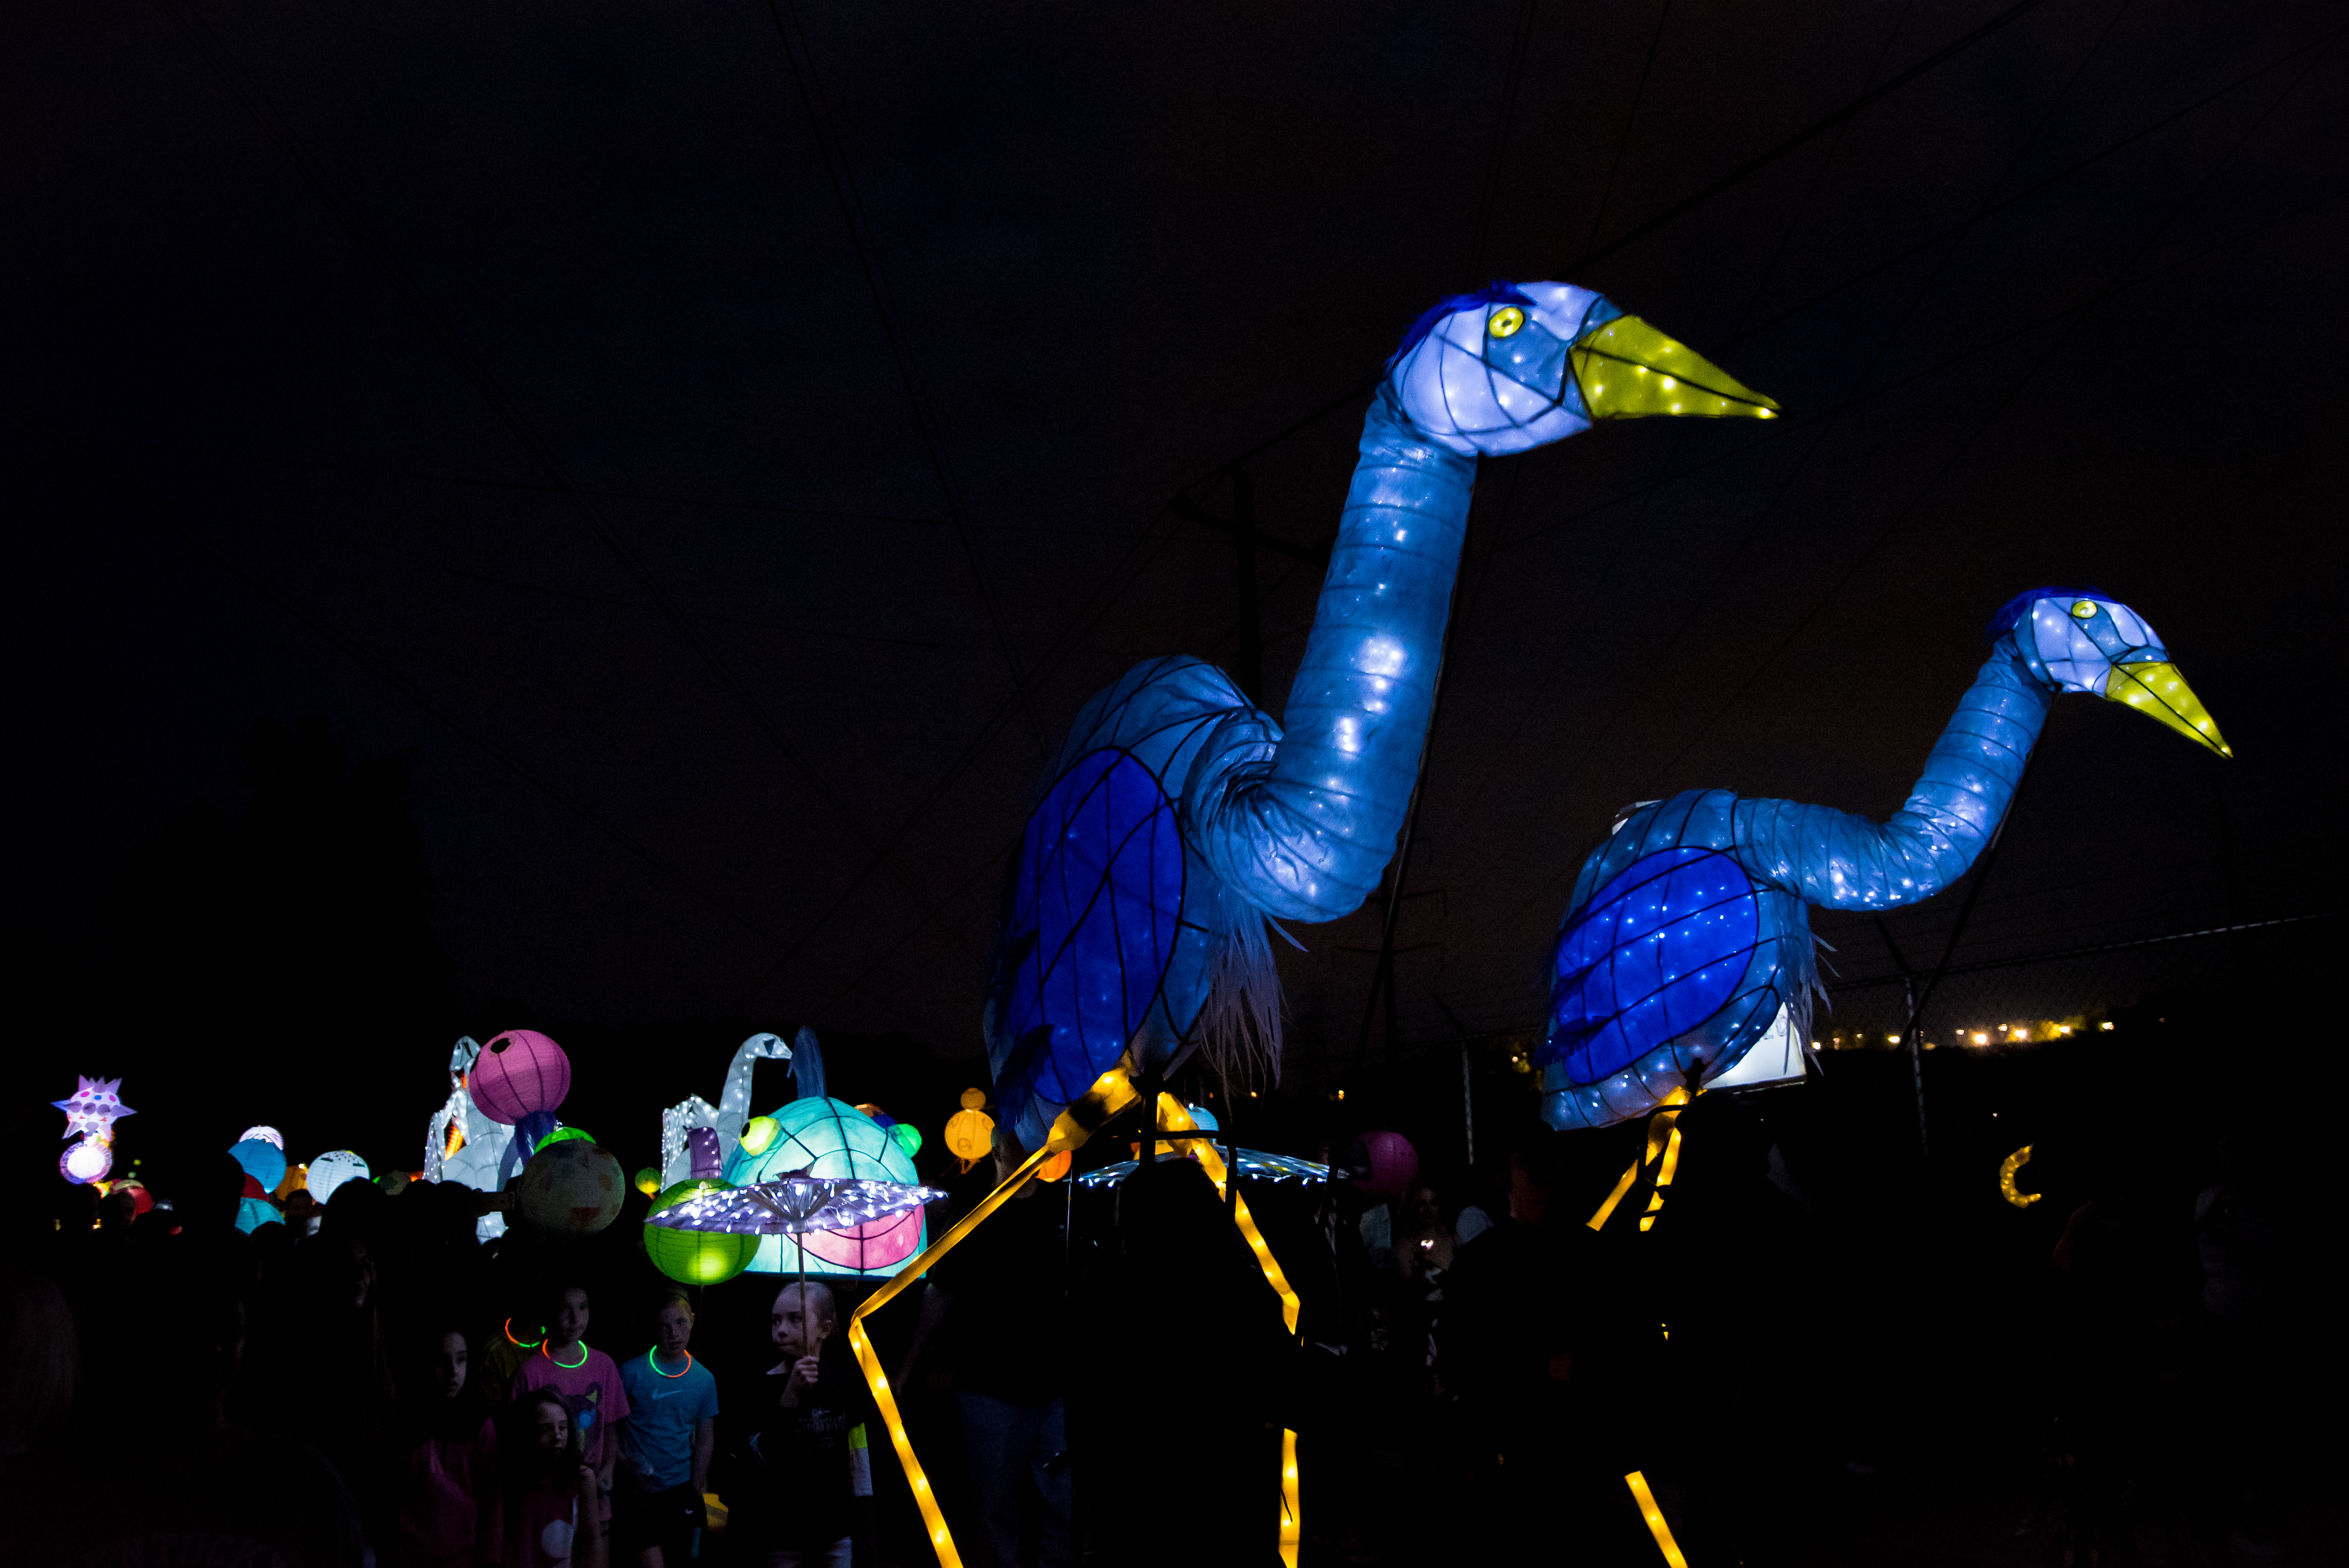 Two large bird puppets tower over guests at the Lantern Parade 